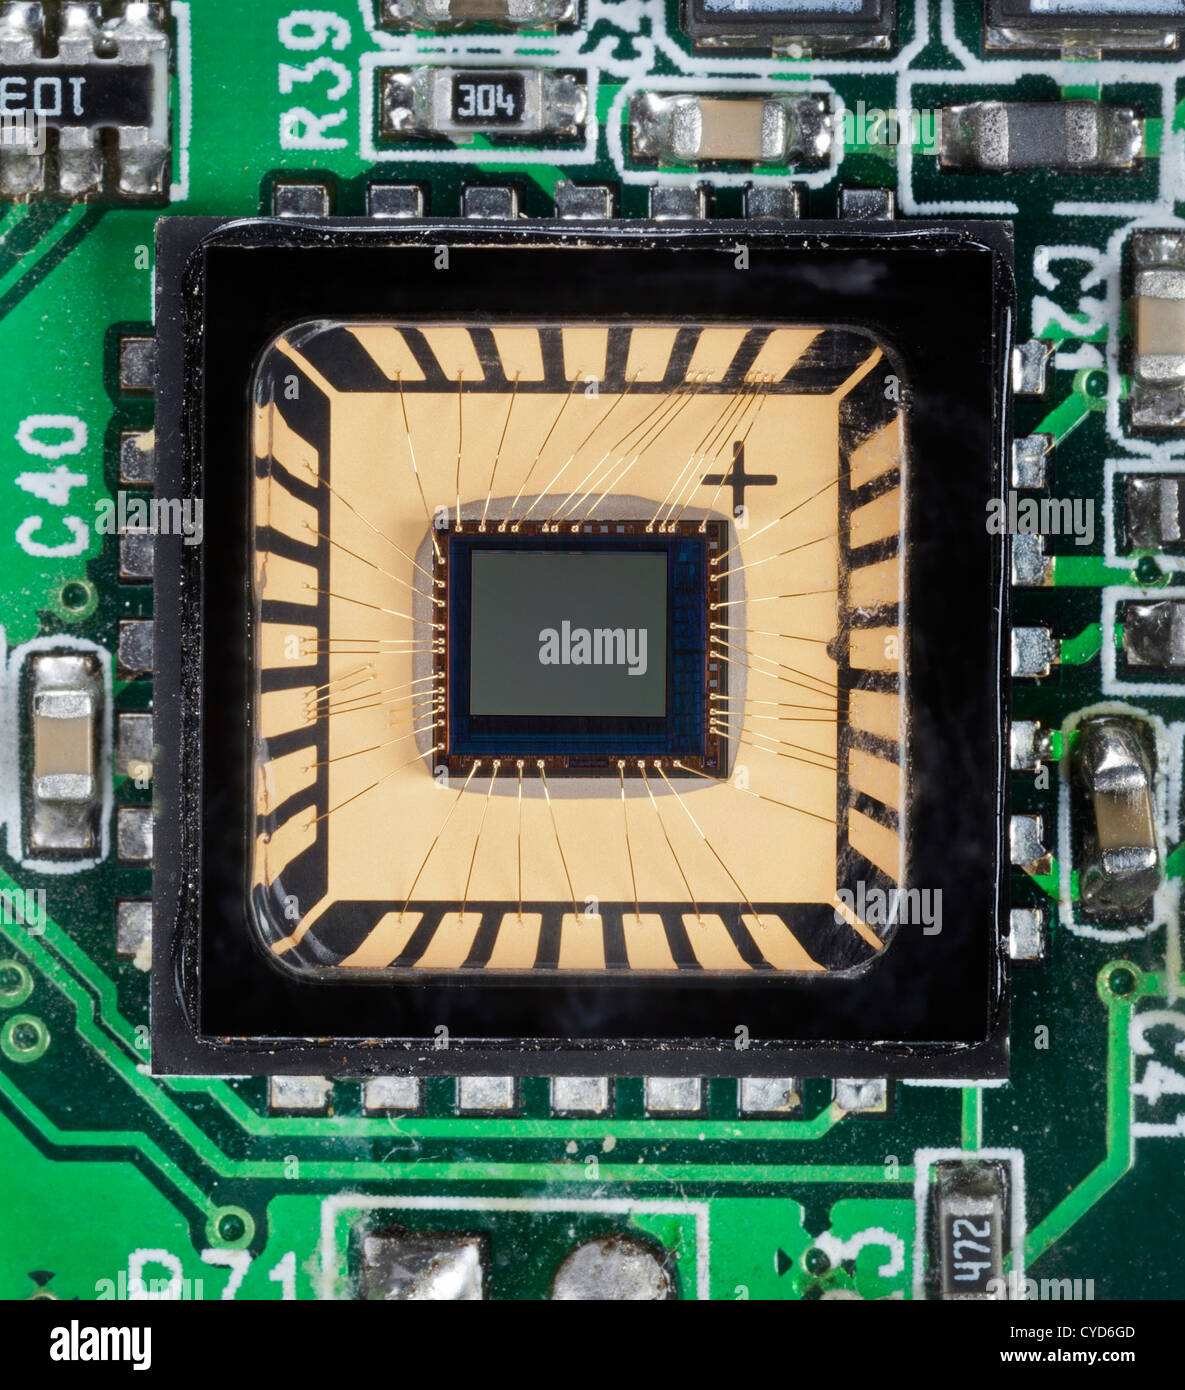 Tiny cmos chip on ic board with connecting wires from a webcam camera, Stock Photo